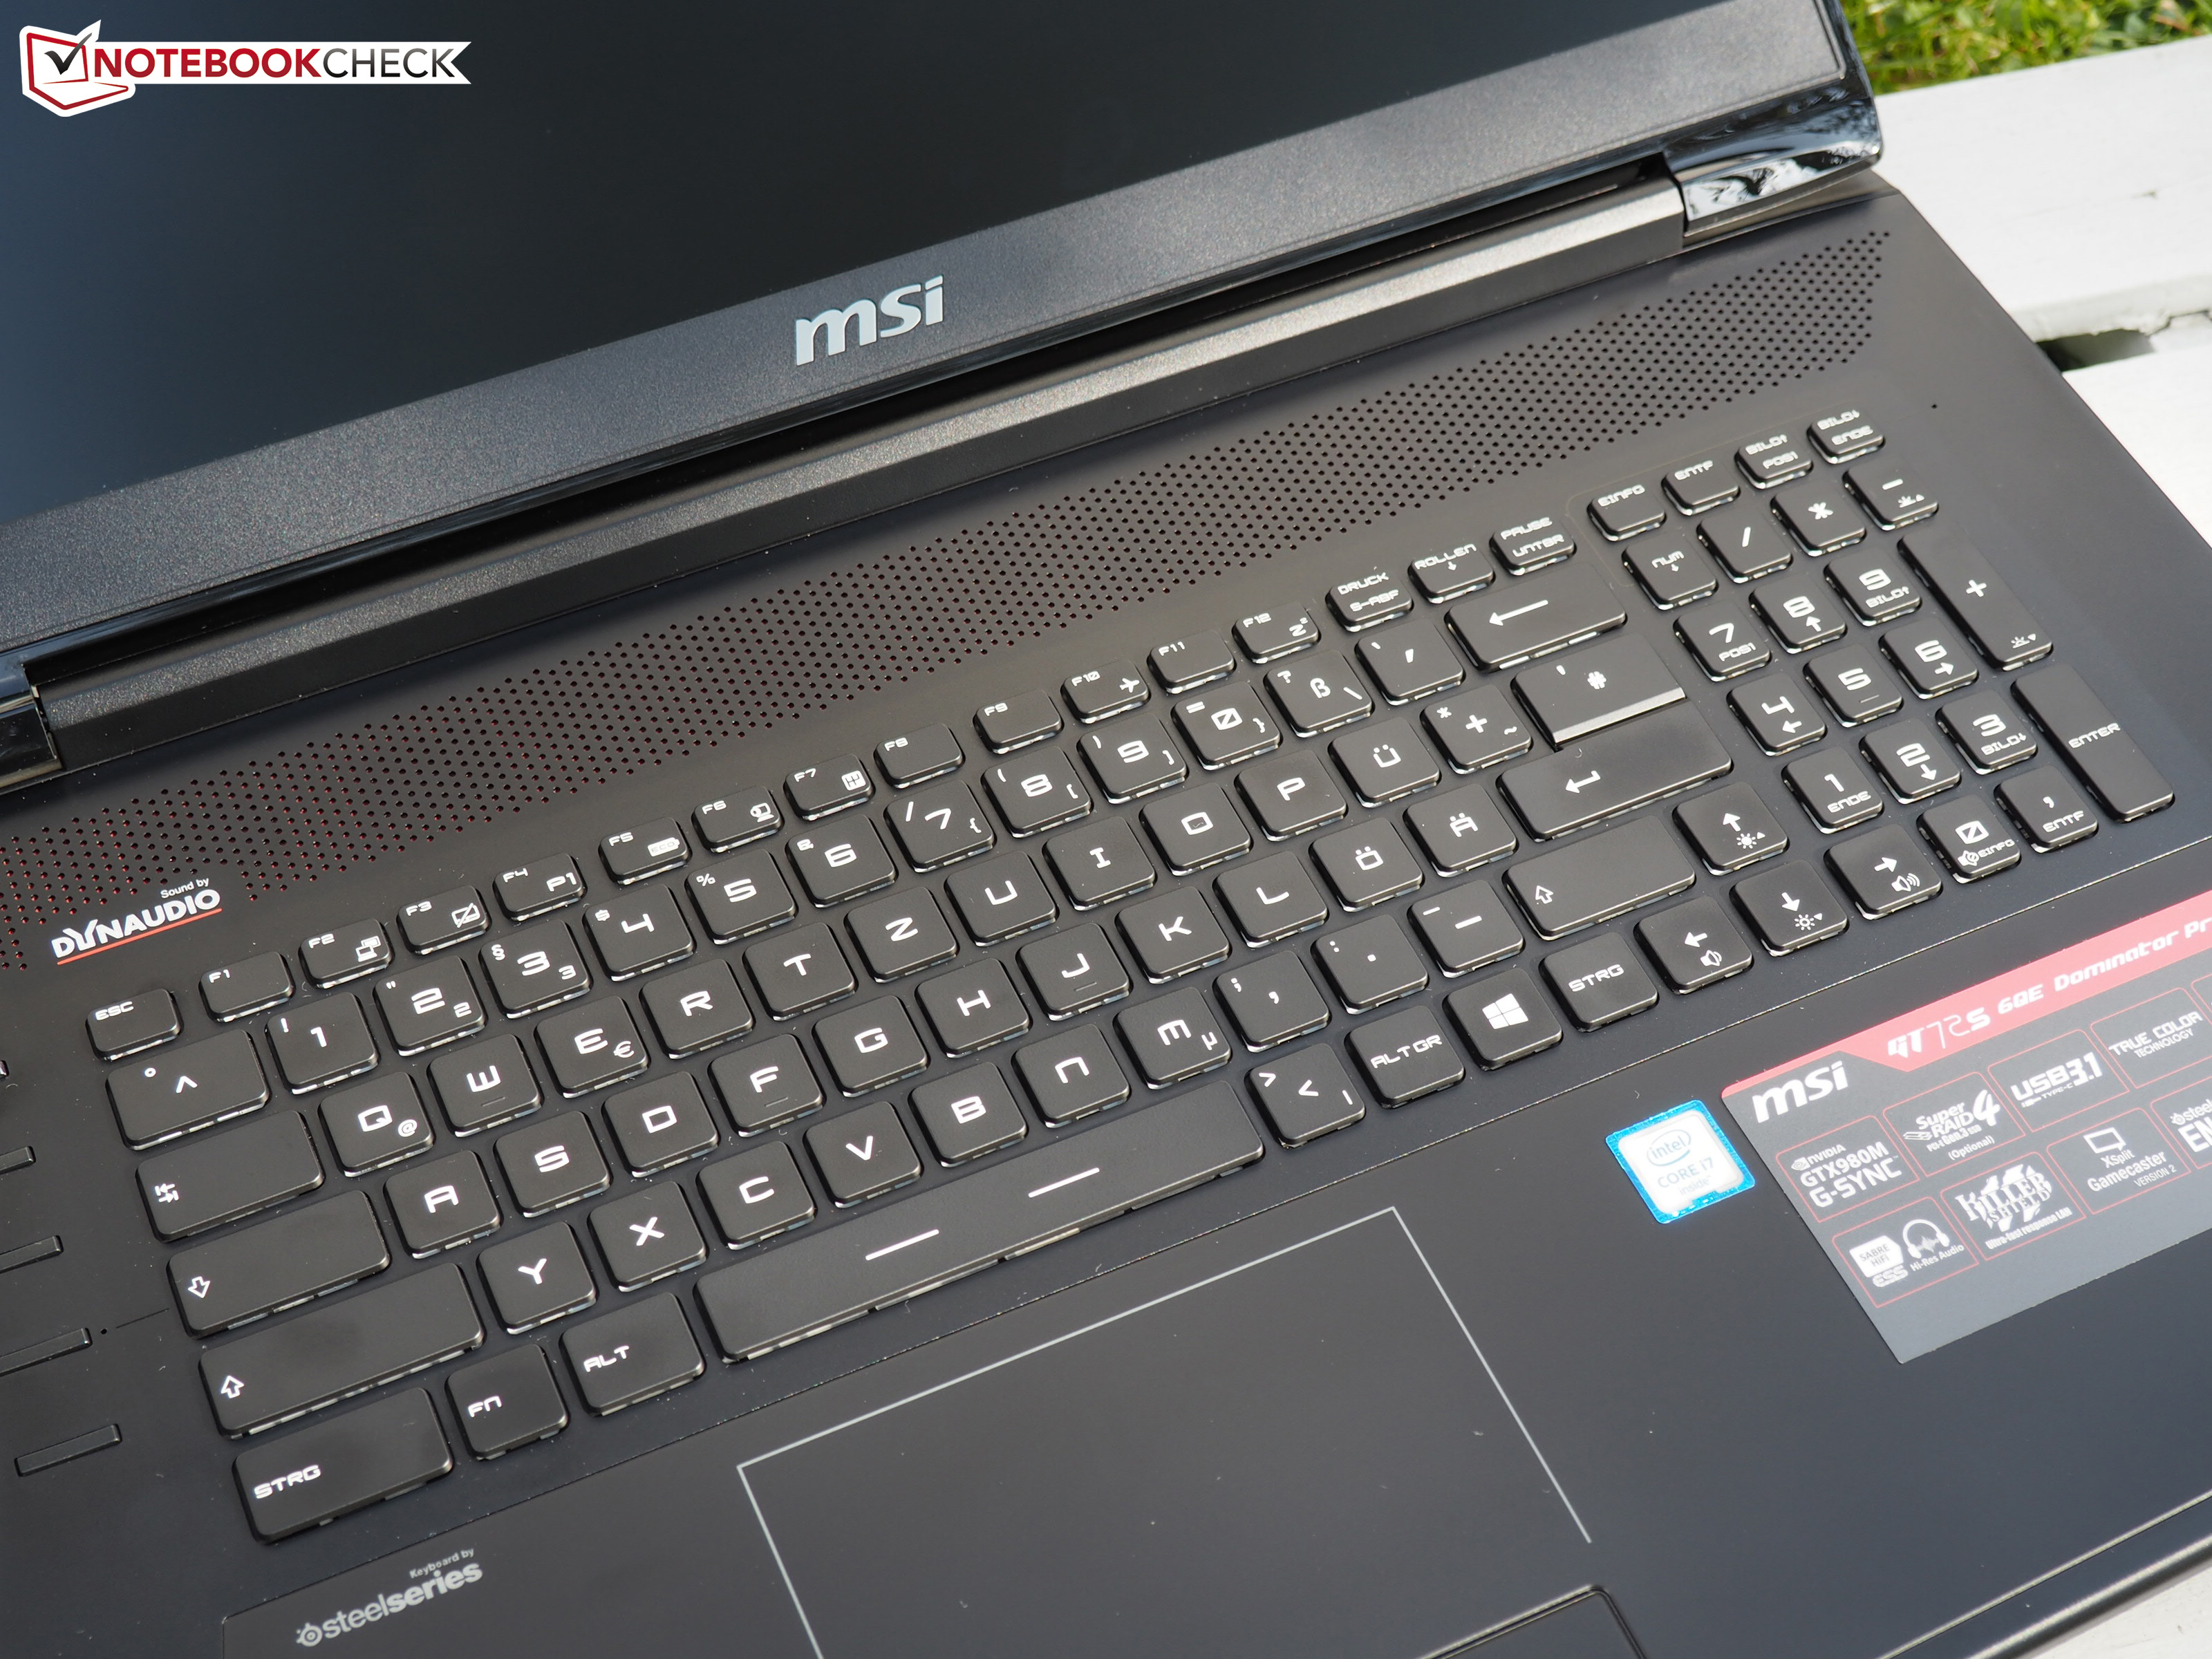 MSI GT72S 6QE Dominator Pro G Notebook Review - NotebookCheck.net Reviews